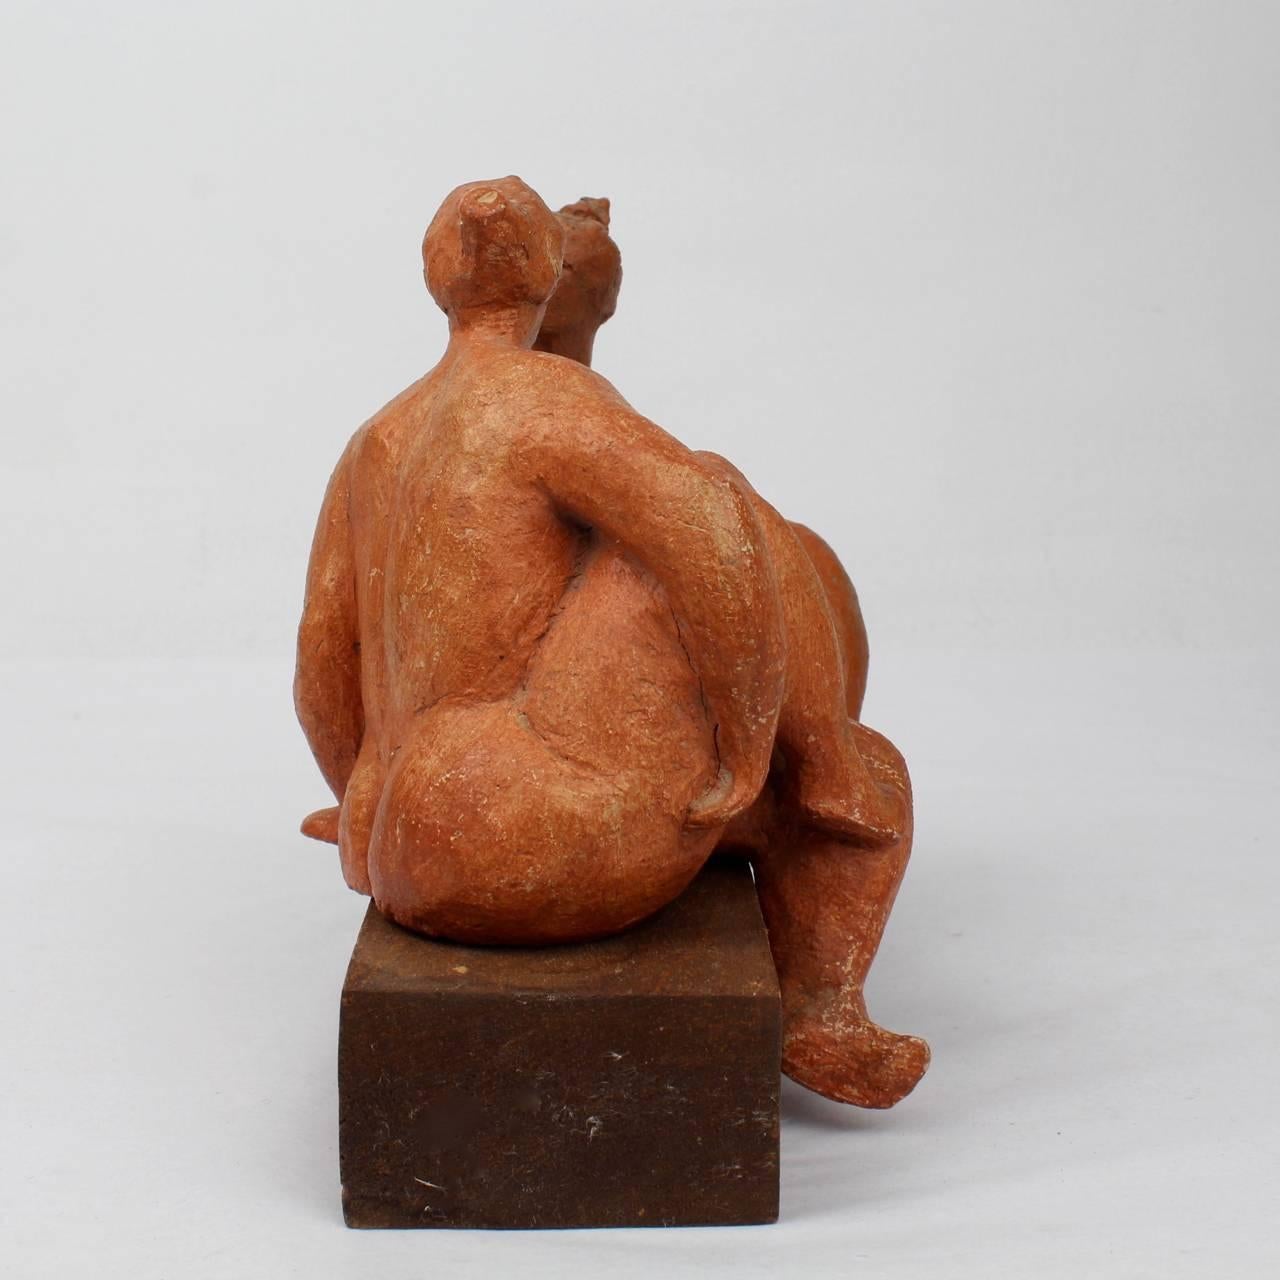 A modernist group of two terracotta sculptures by F. Kahn.

Depicting two plump women posed in conversation. Terrific whimsy and style. 

Placed on a wooden block that is integral to the work. Painted with a orange-red wash.

Signed 'F. Kahn'